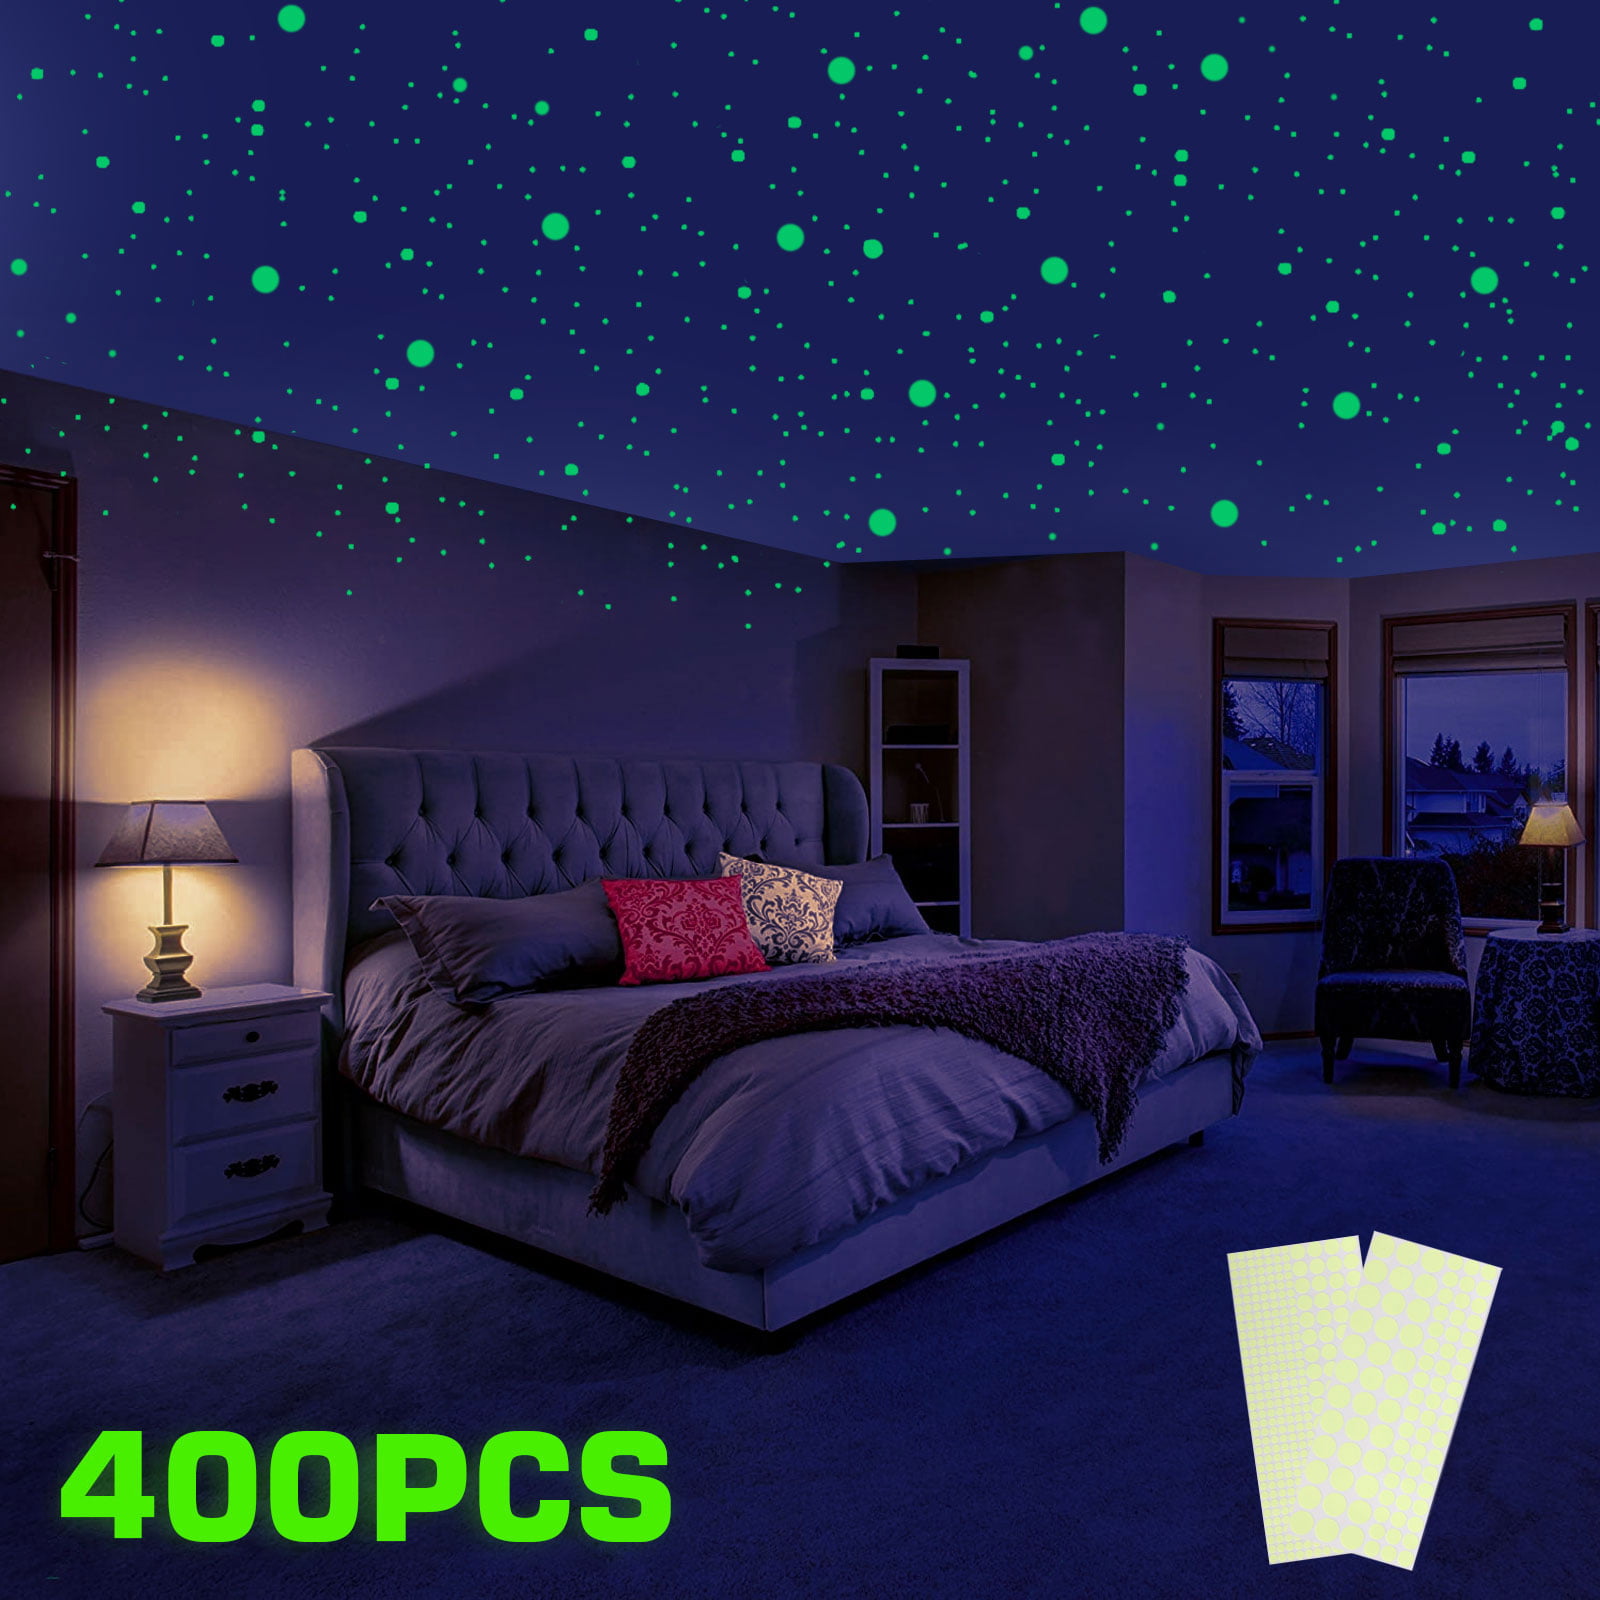 Wall & Ceiling Stickers Glow in the Dark Space Shapes Childrens Wall Art 